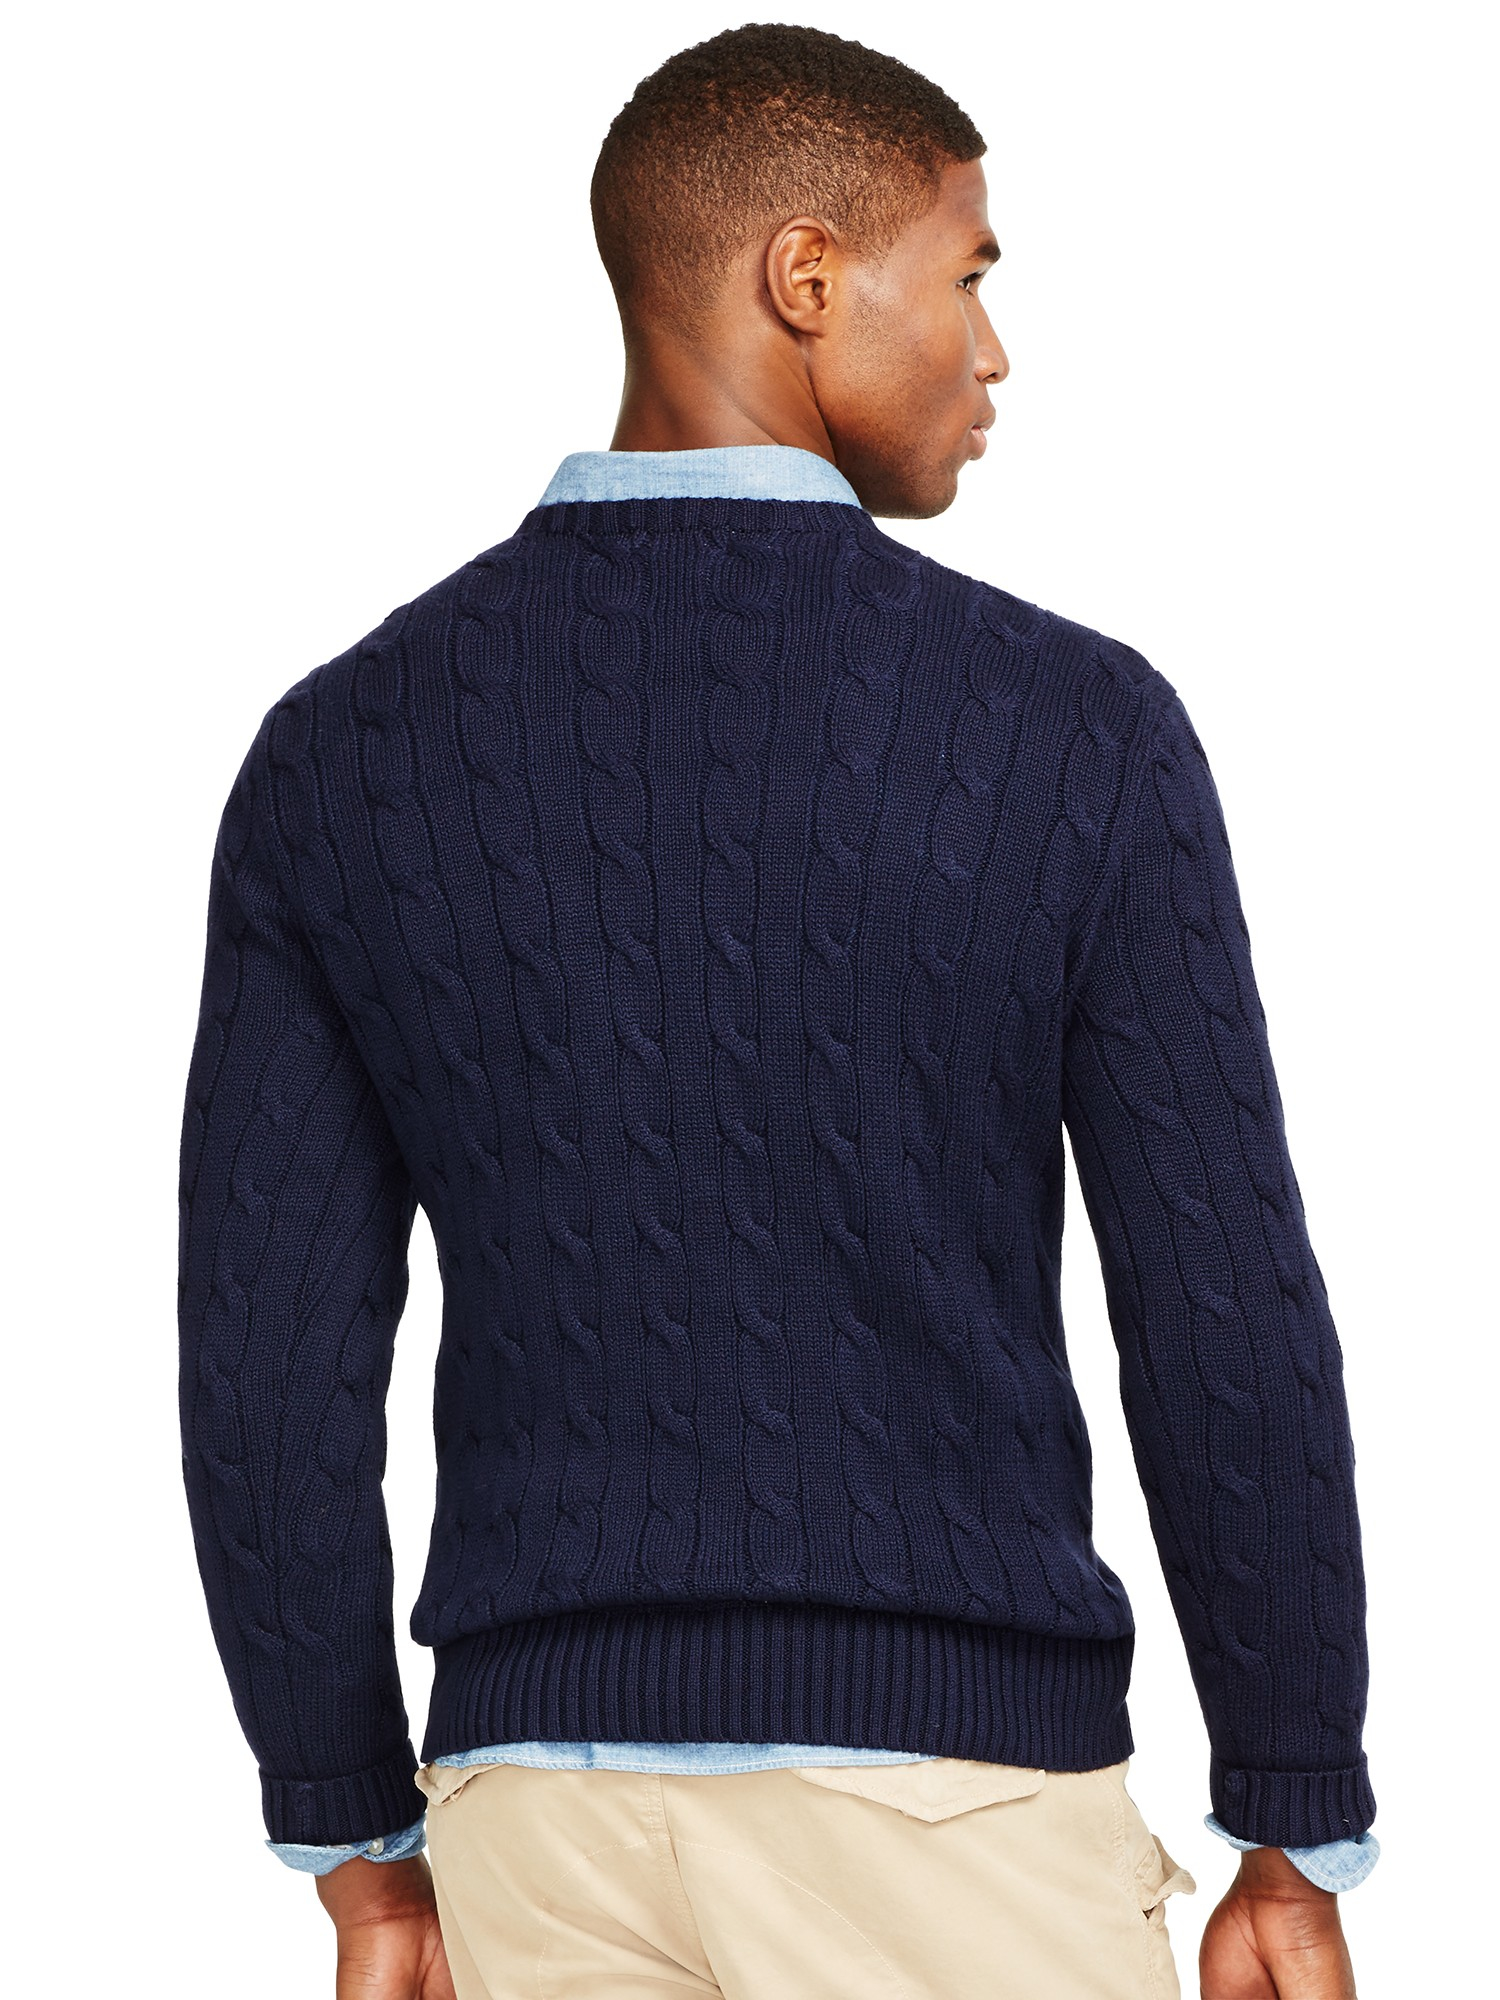 Polo Ralph Lauren Cable Knit Crew Neck Jumper in Blue for Men - Lyst